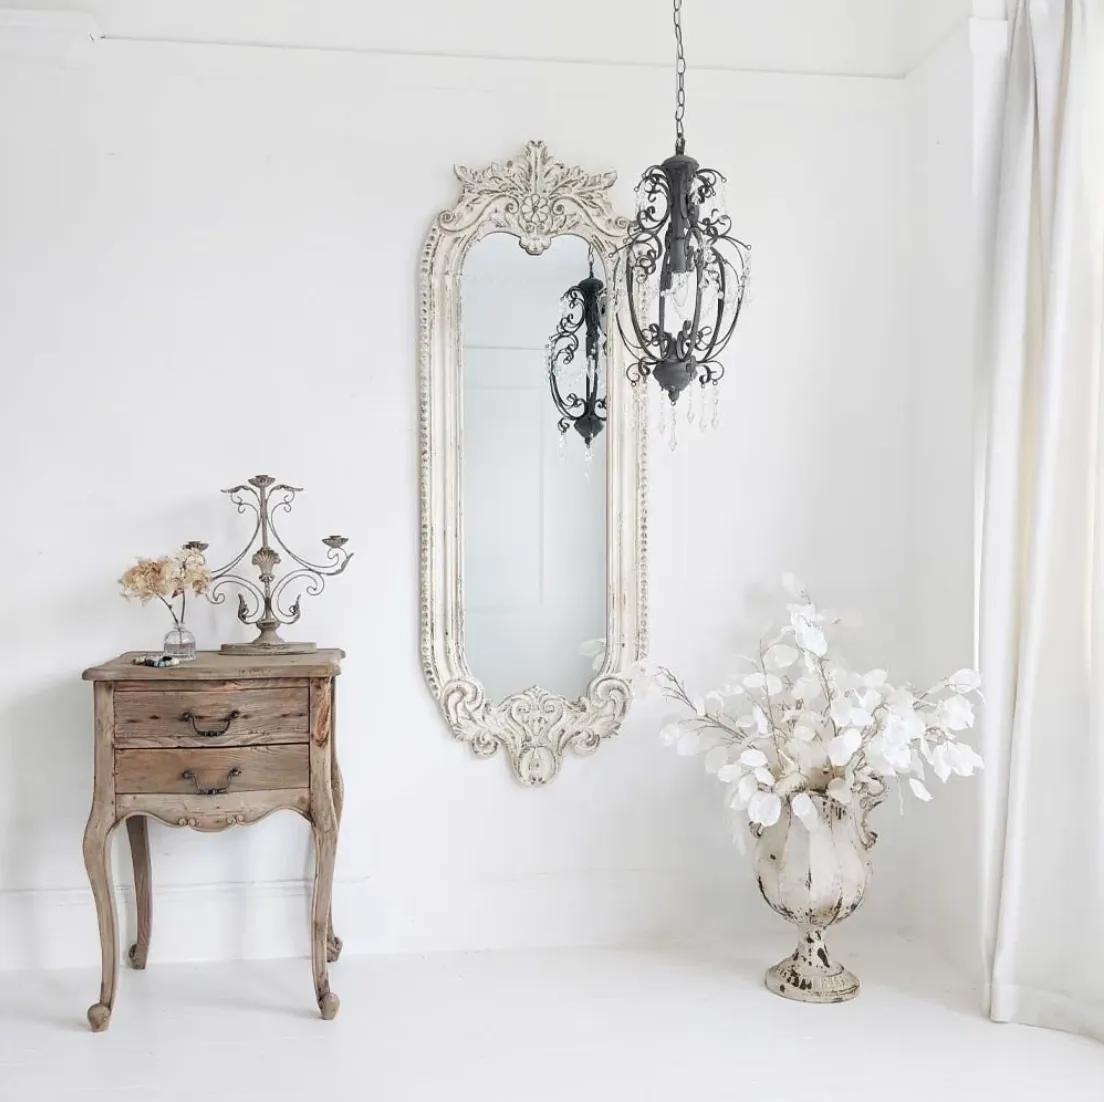 Elodie Pendant Chandelier in French Grey, The French Bedroom Company